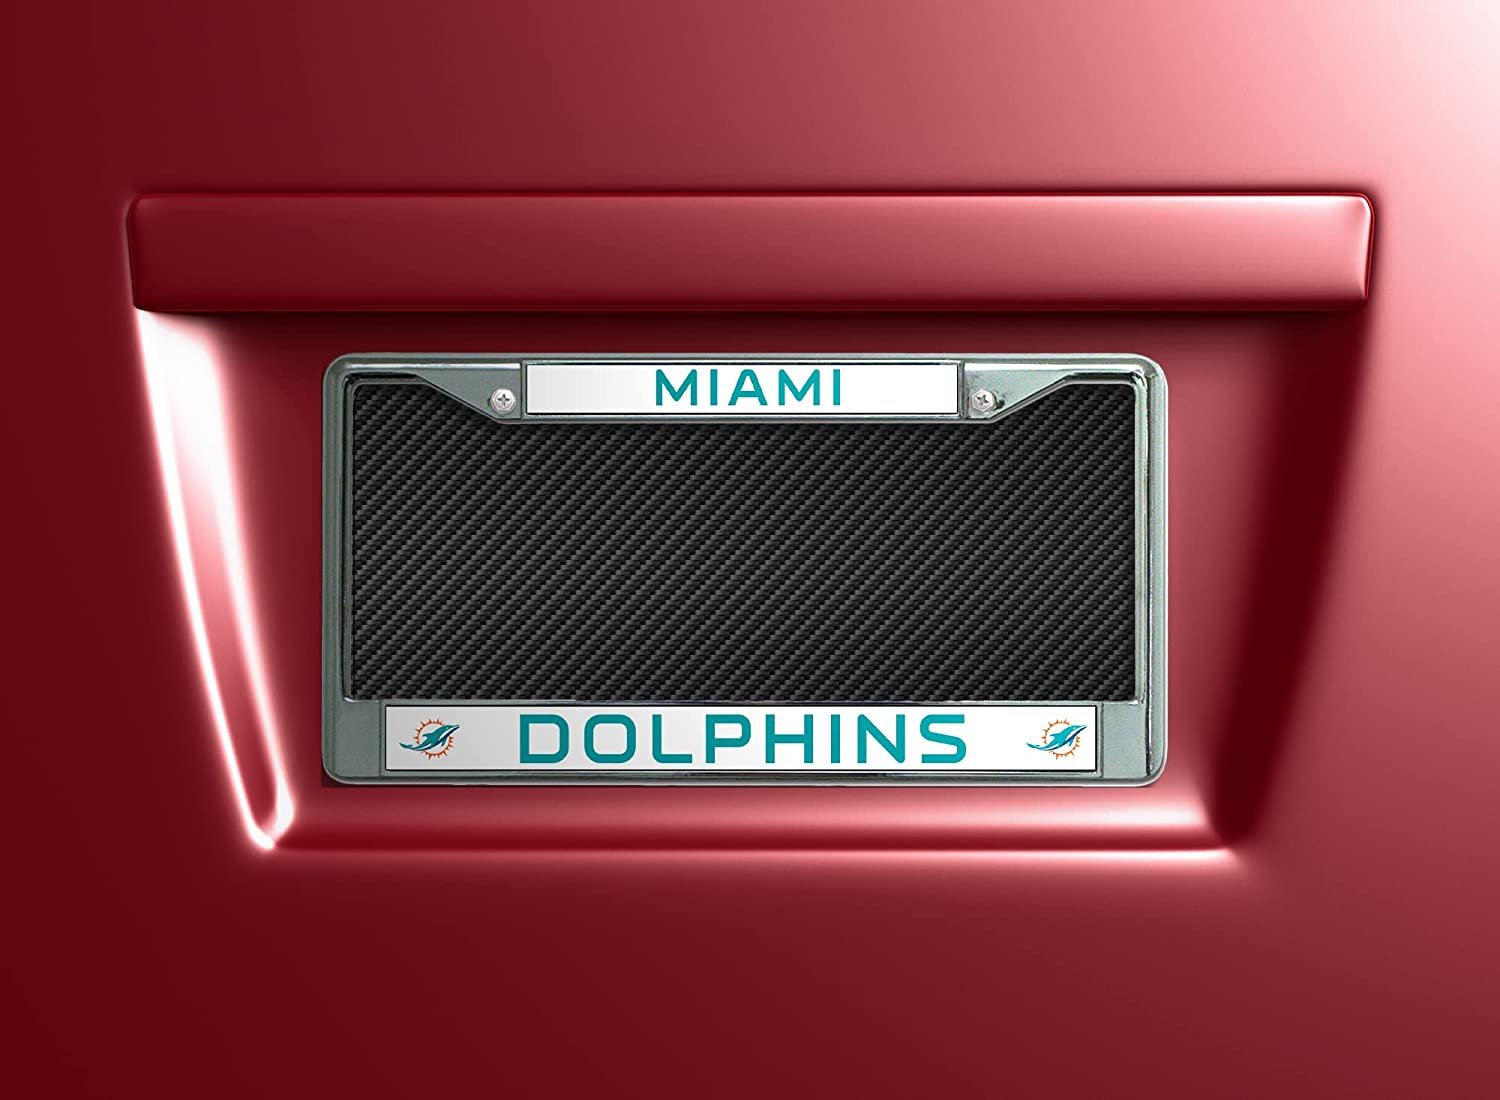 Miami Dolphins Metal License Plate Frame Chrome Tag Cover 6x12 Inch